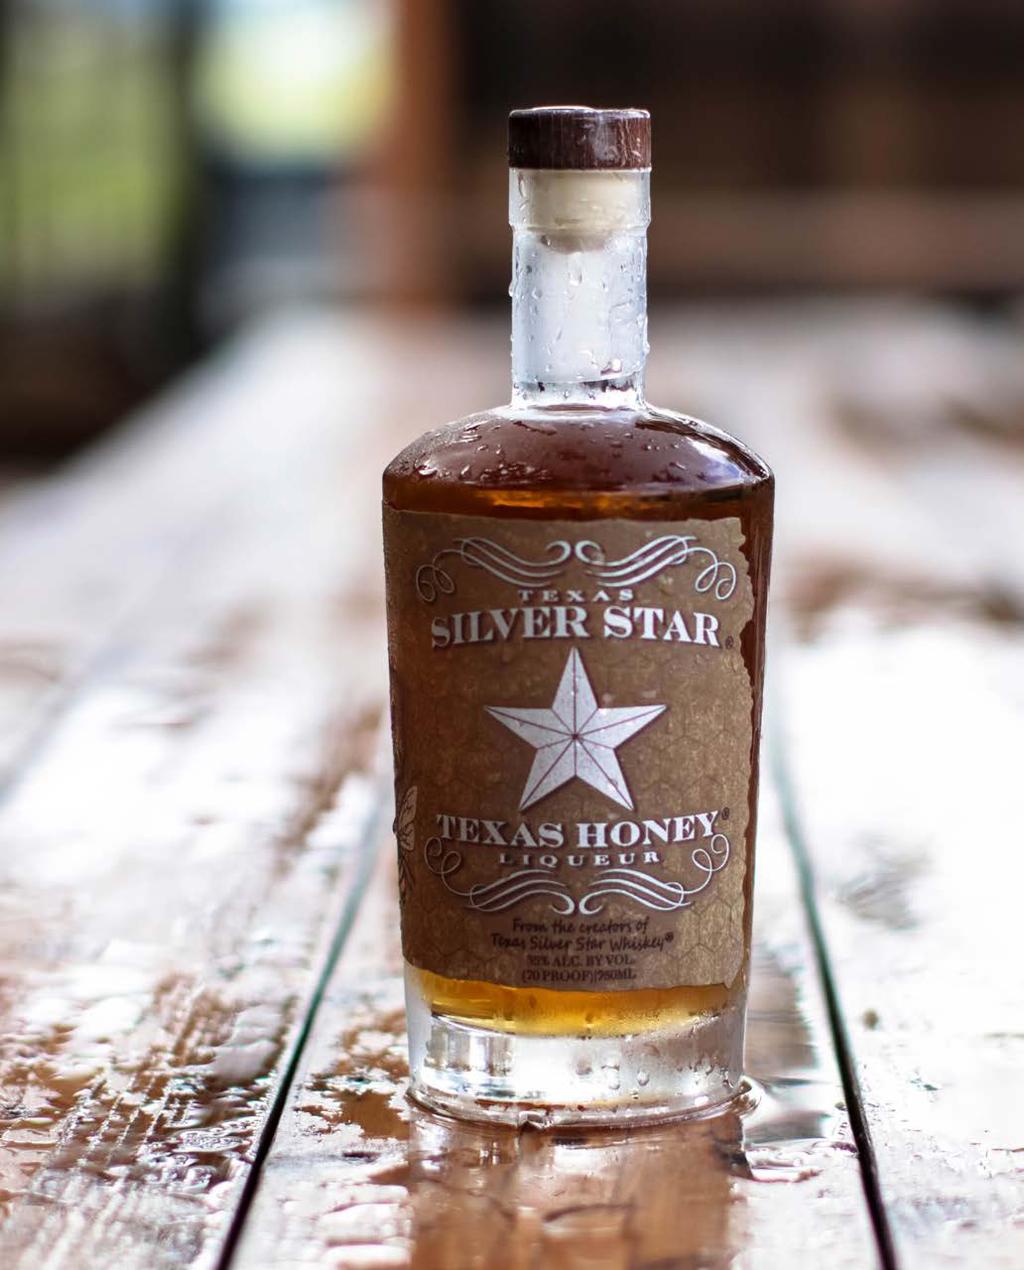 Texas silver star honey Liqueur Aptly named because that's what it's made with: real Texas wildflower honey from Texas Hill Country blended with Texas Silver Star Whiskey.